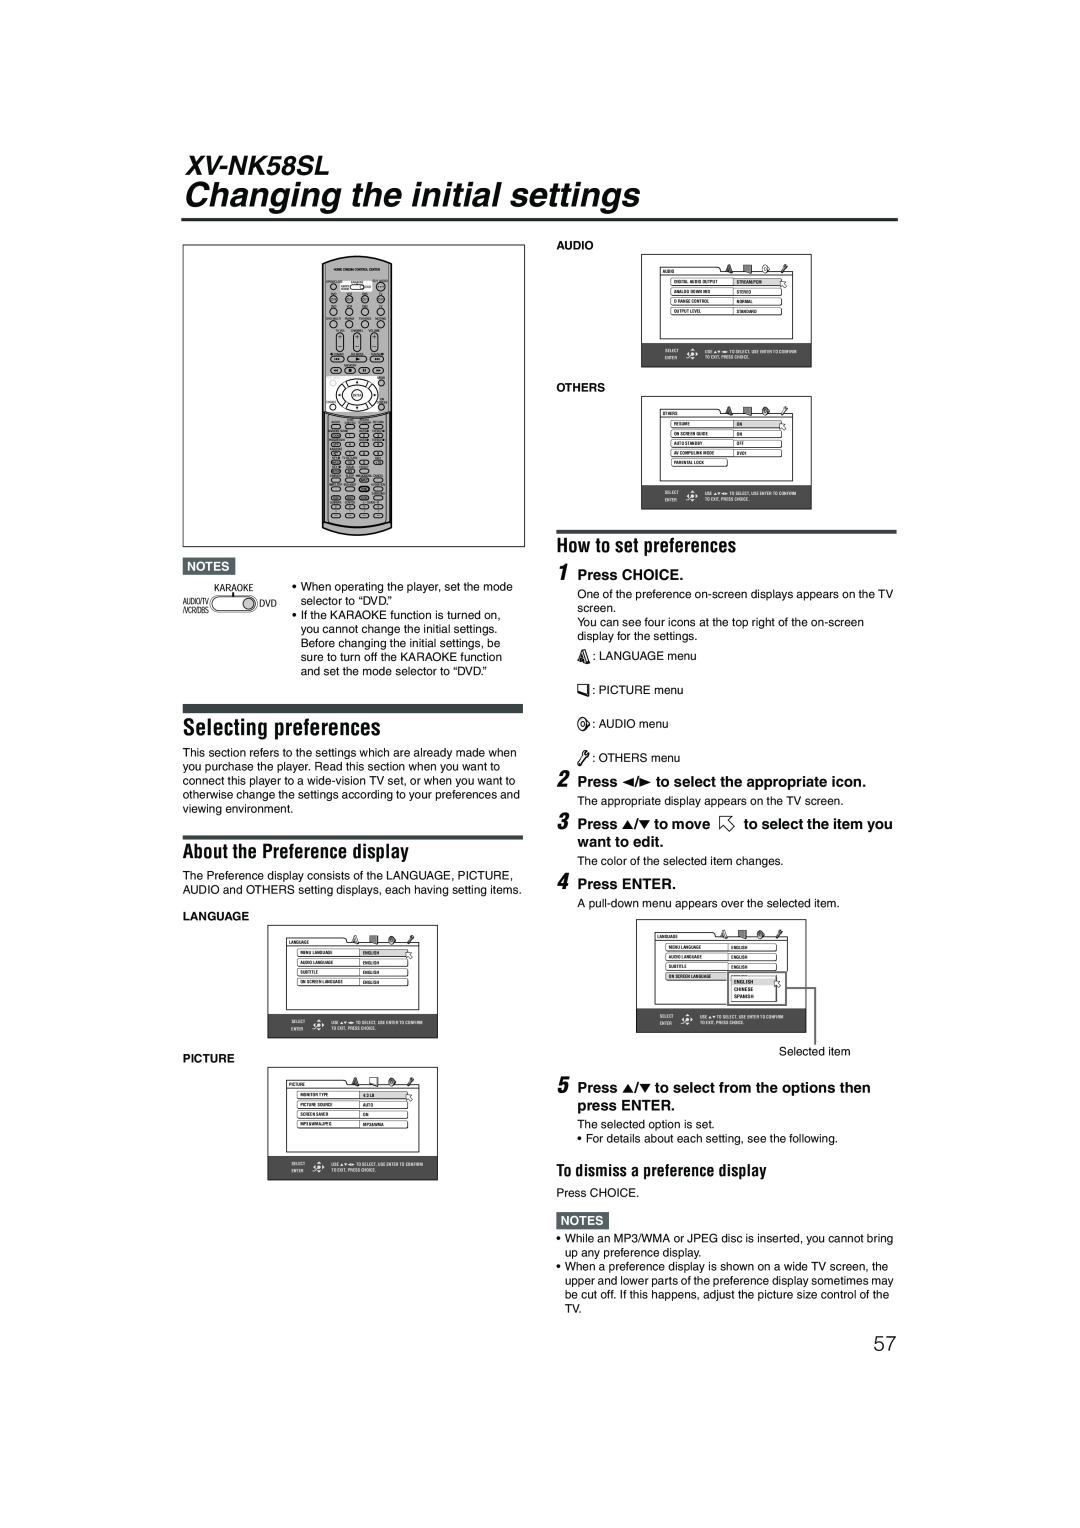 JVC LVT1002-012B Changing the initial settings, Selecting preferences, About the Preference display, Press CHOICE, Audio 